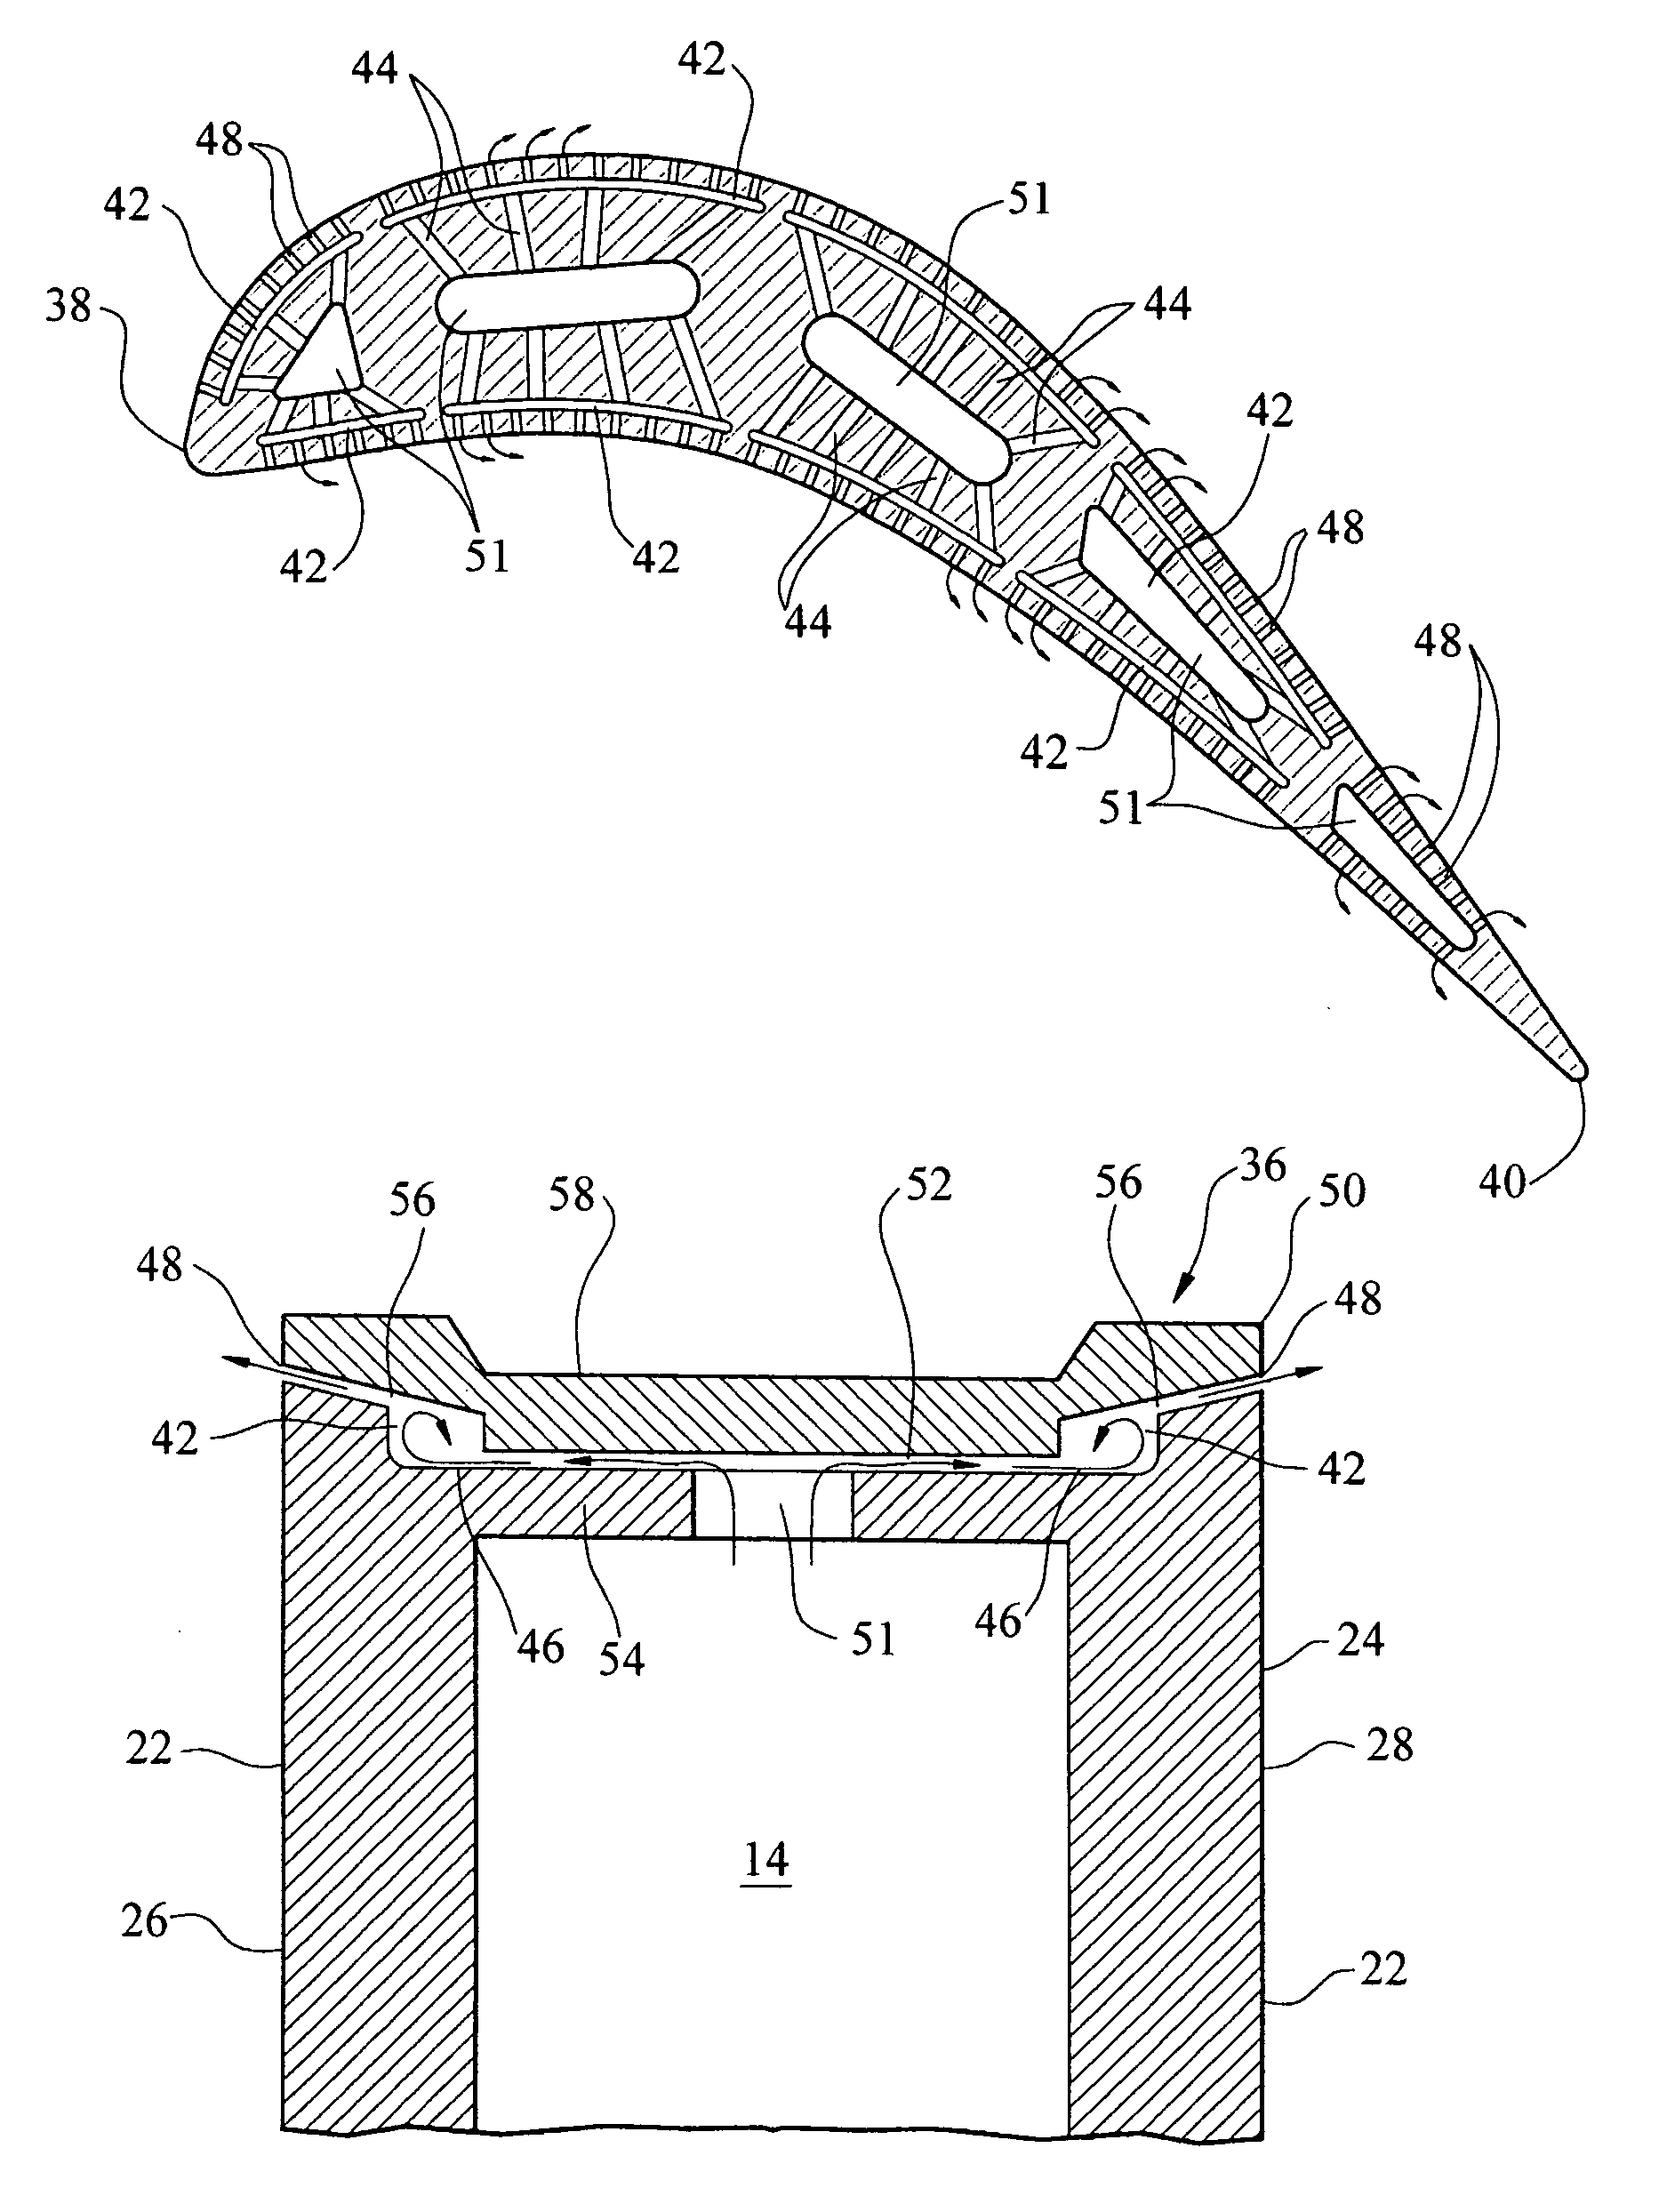 Cooling system for a tip of a turbine blade